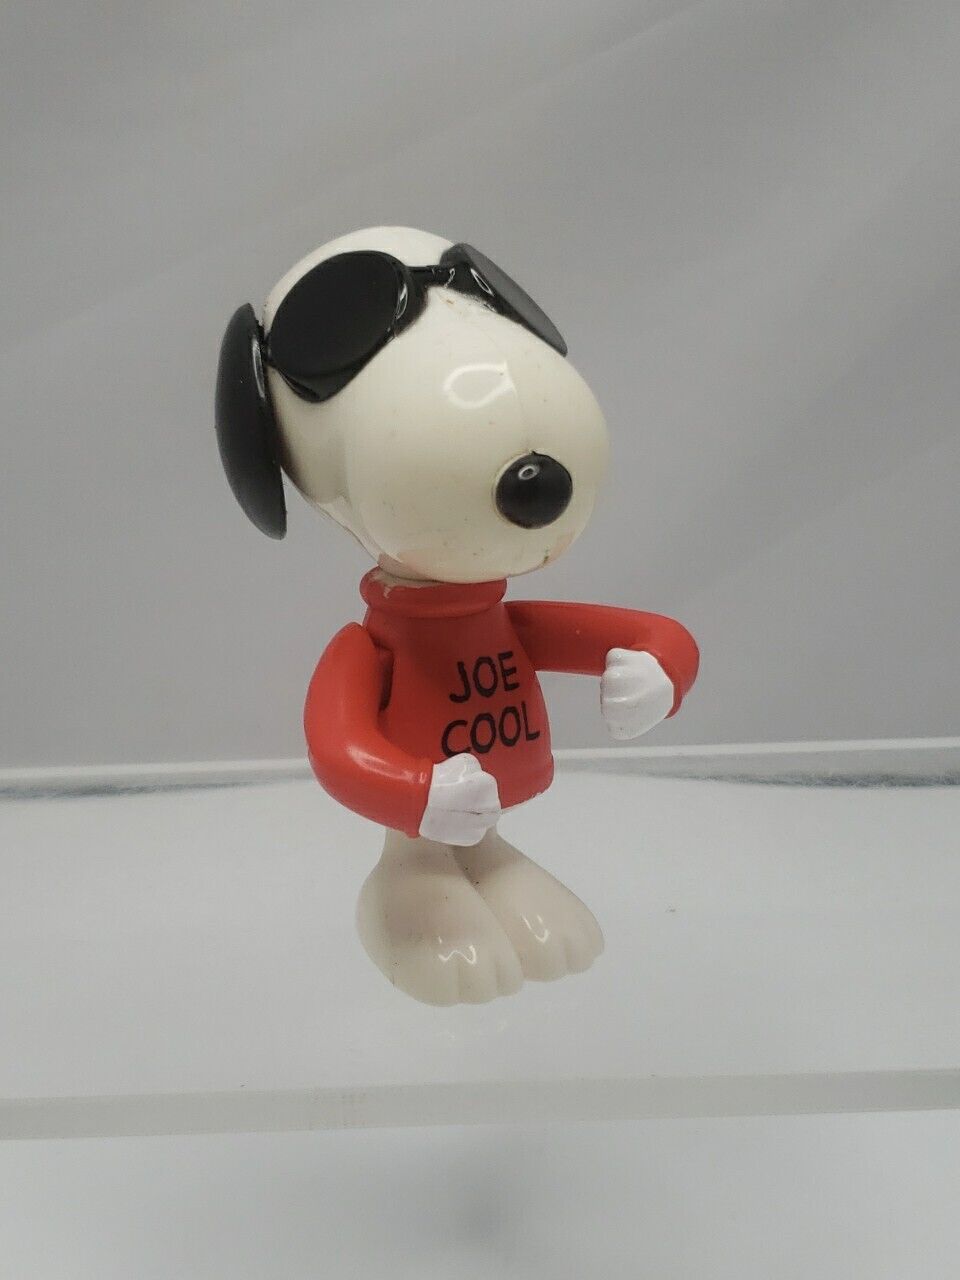 Snoopy Joe Cool Hard Plastic Push Button Arms Move Peanuts Collection Super Cool